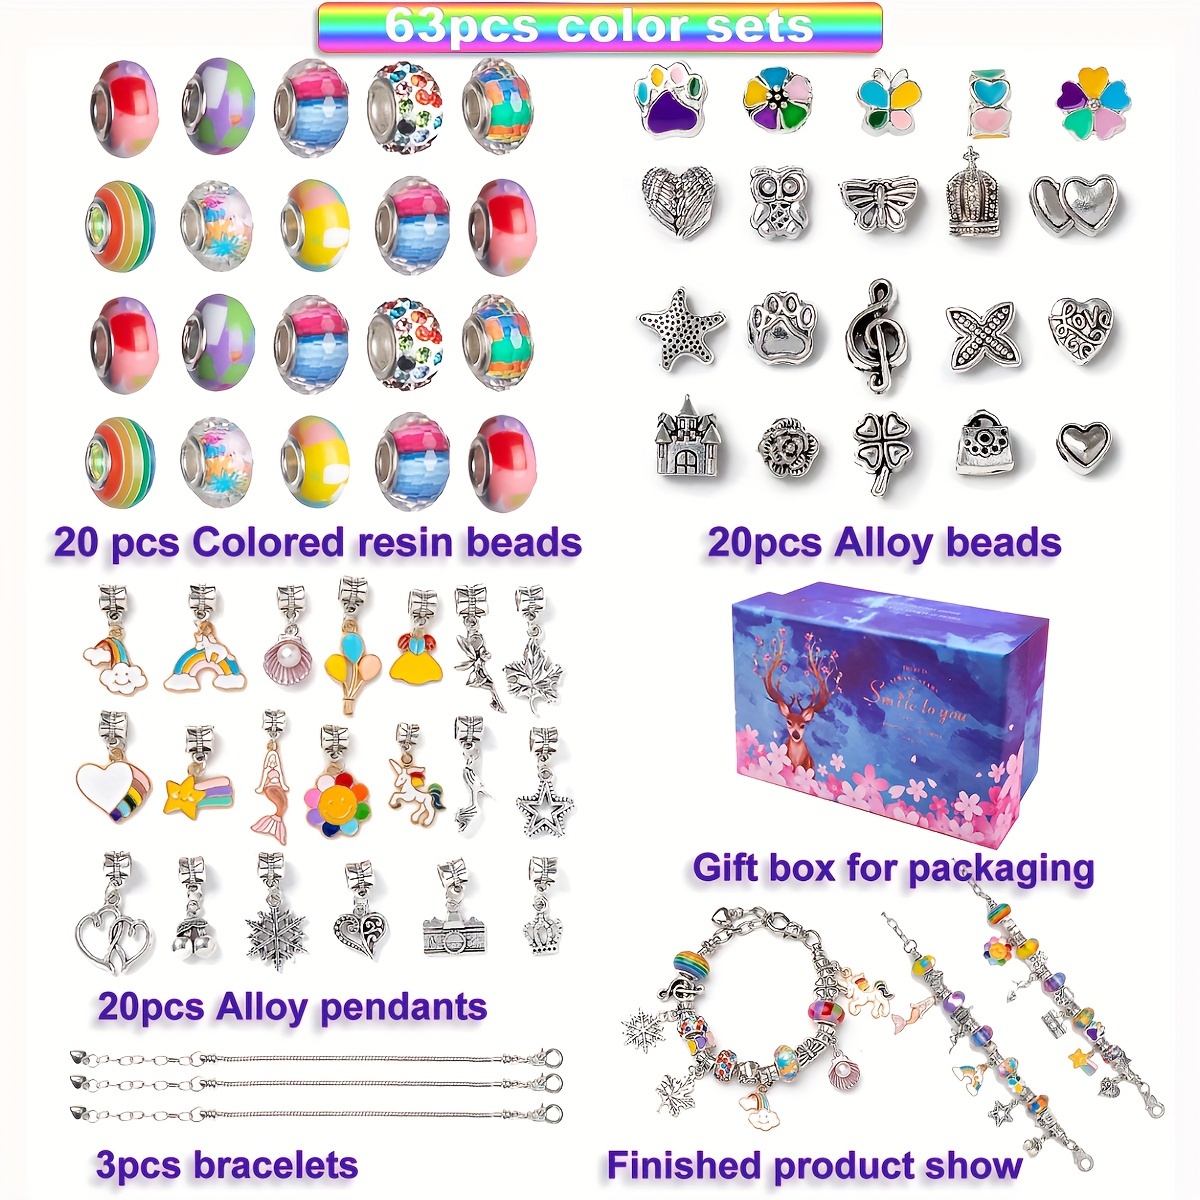 Xelparuc 85 Pieces Charm Bracelet Making Kit Including Jewelry Beads Snake Chain DIY Craft Jewelry Gift Set for Kids Girls Teens, Girl's, Size: One